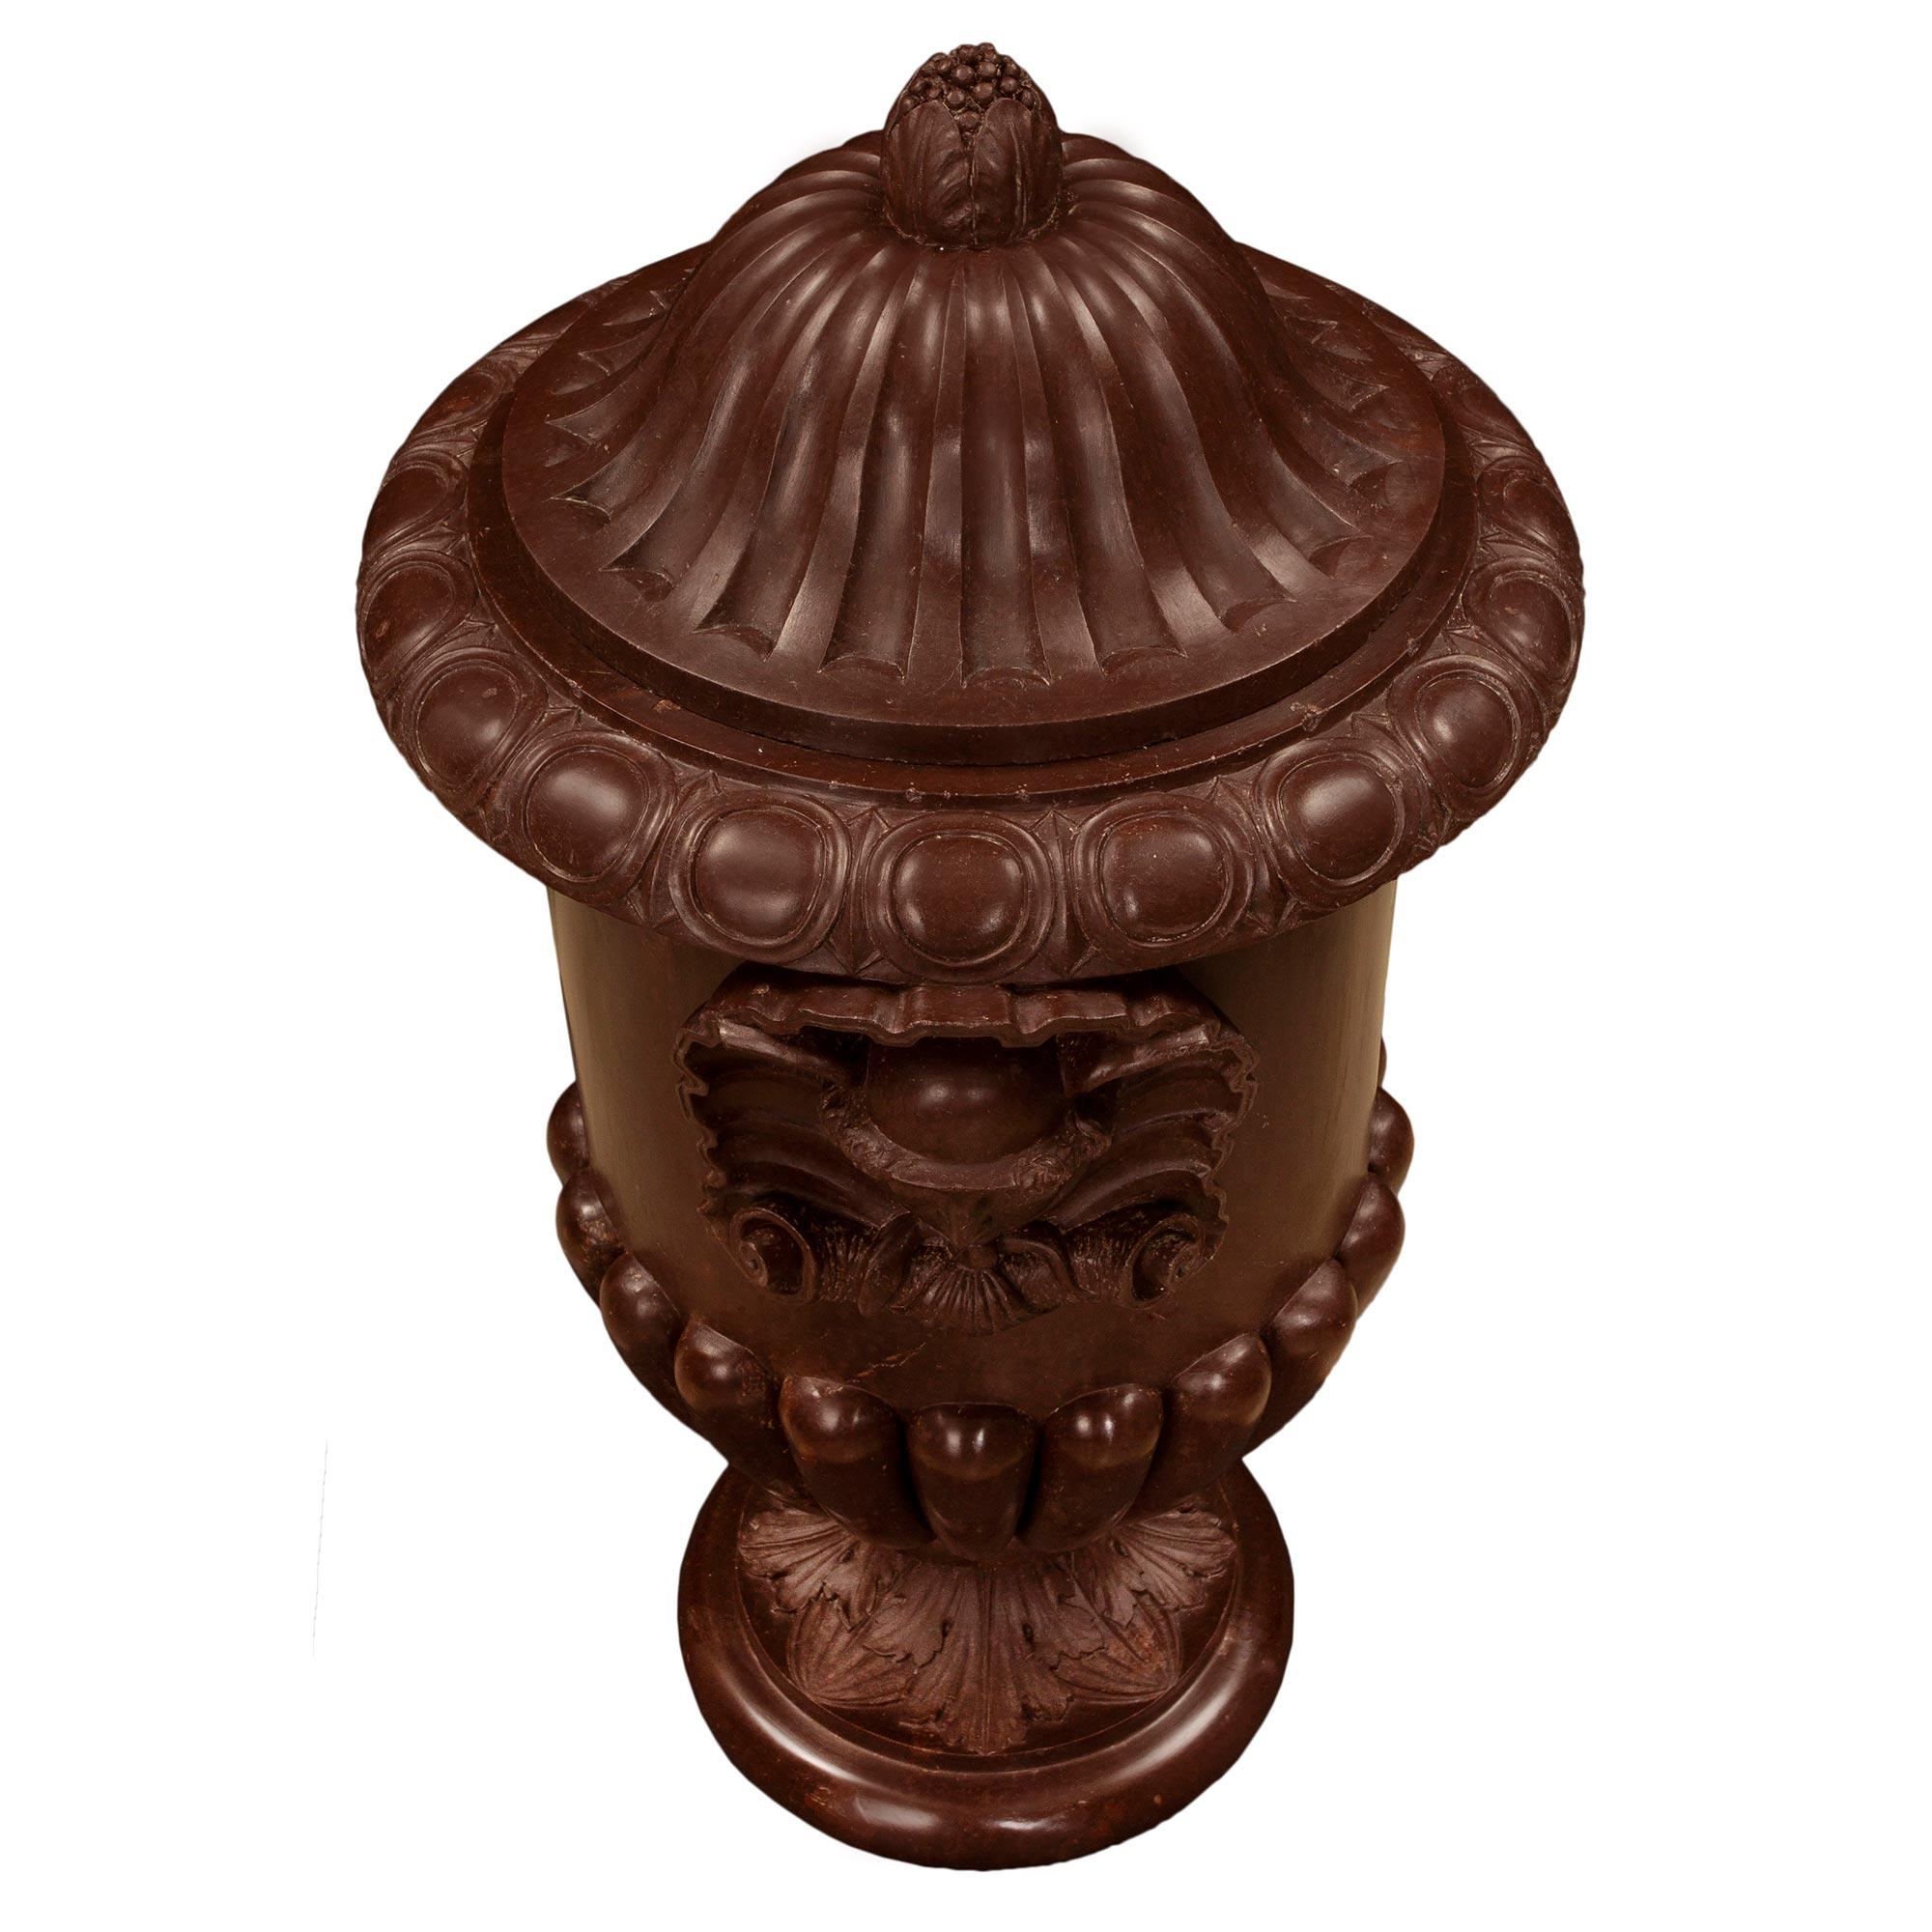 A sensational and richly carved Italian neo-classical st. mid 19th century Rosso Antico marble lidded urn. The urn is raised by a circular bullnose border with an inner design of large acanthus leaves. The bottom of the urn is decorated by godron